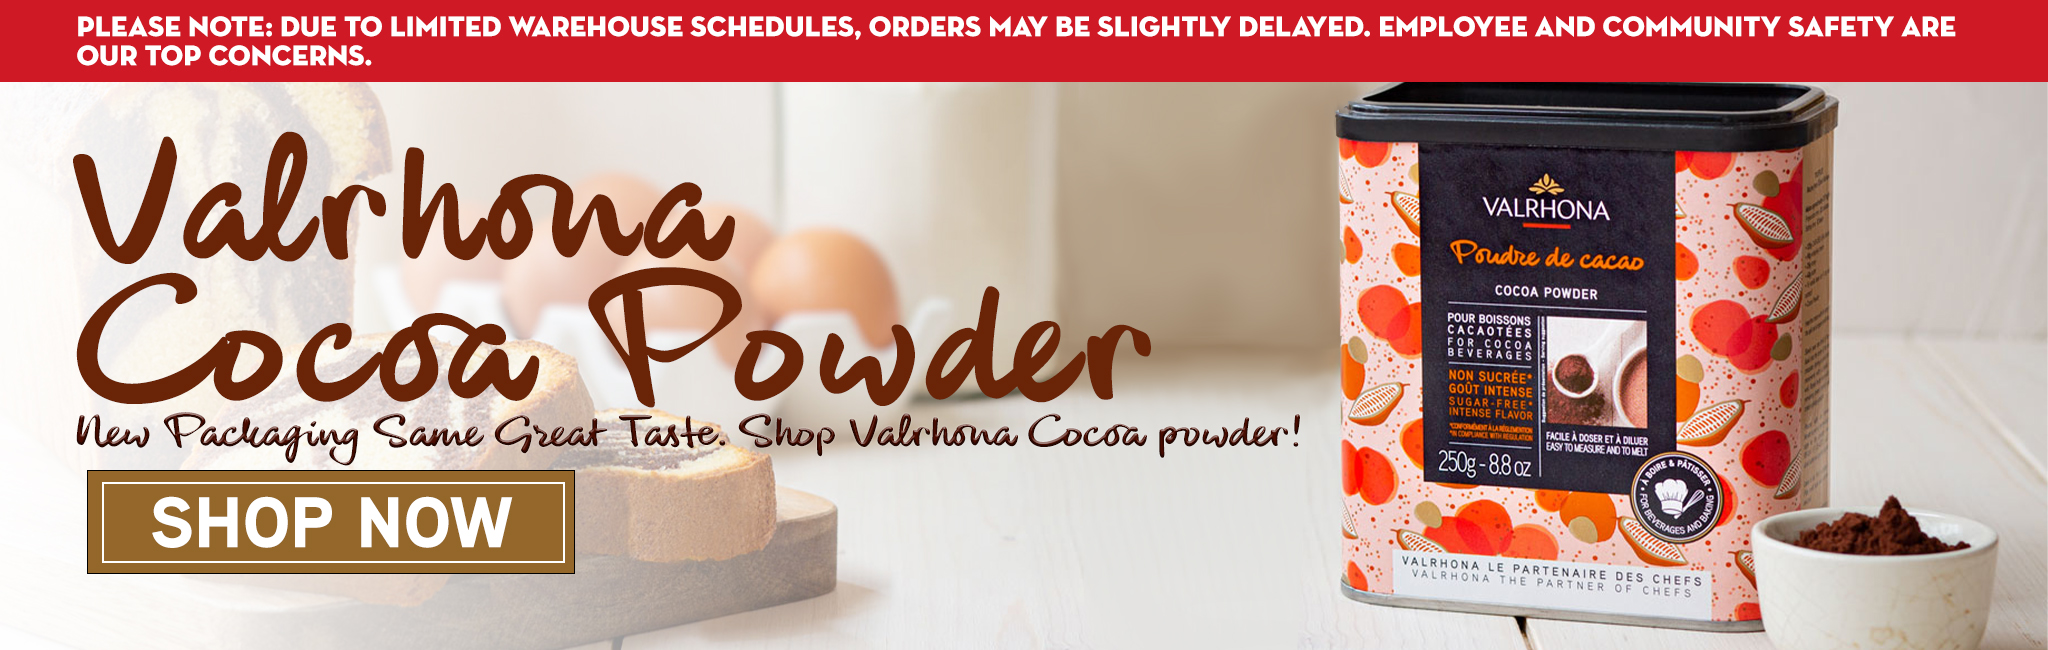 NEW COCOA POWDER PACKAGING